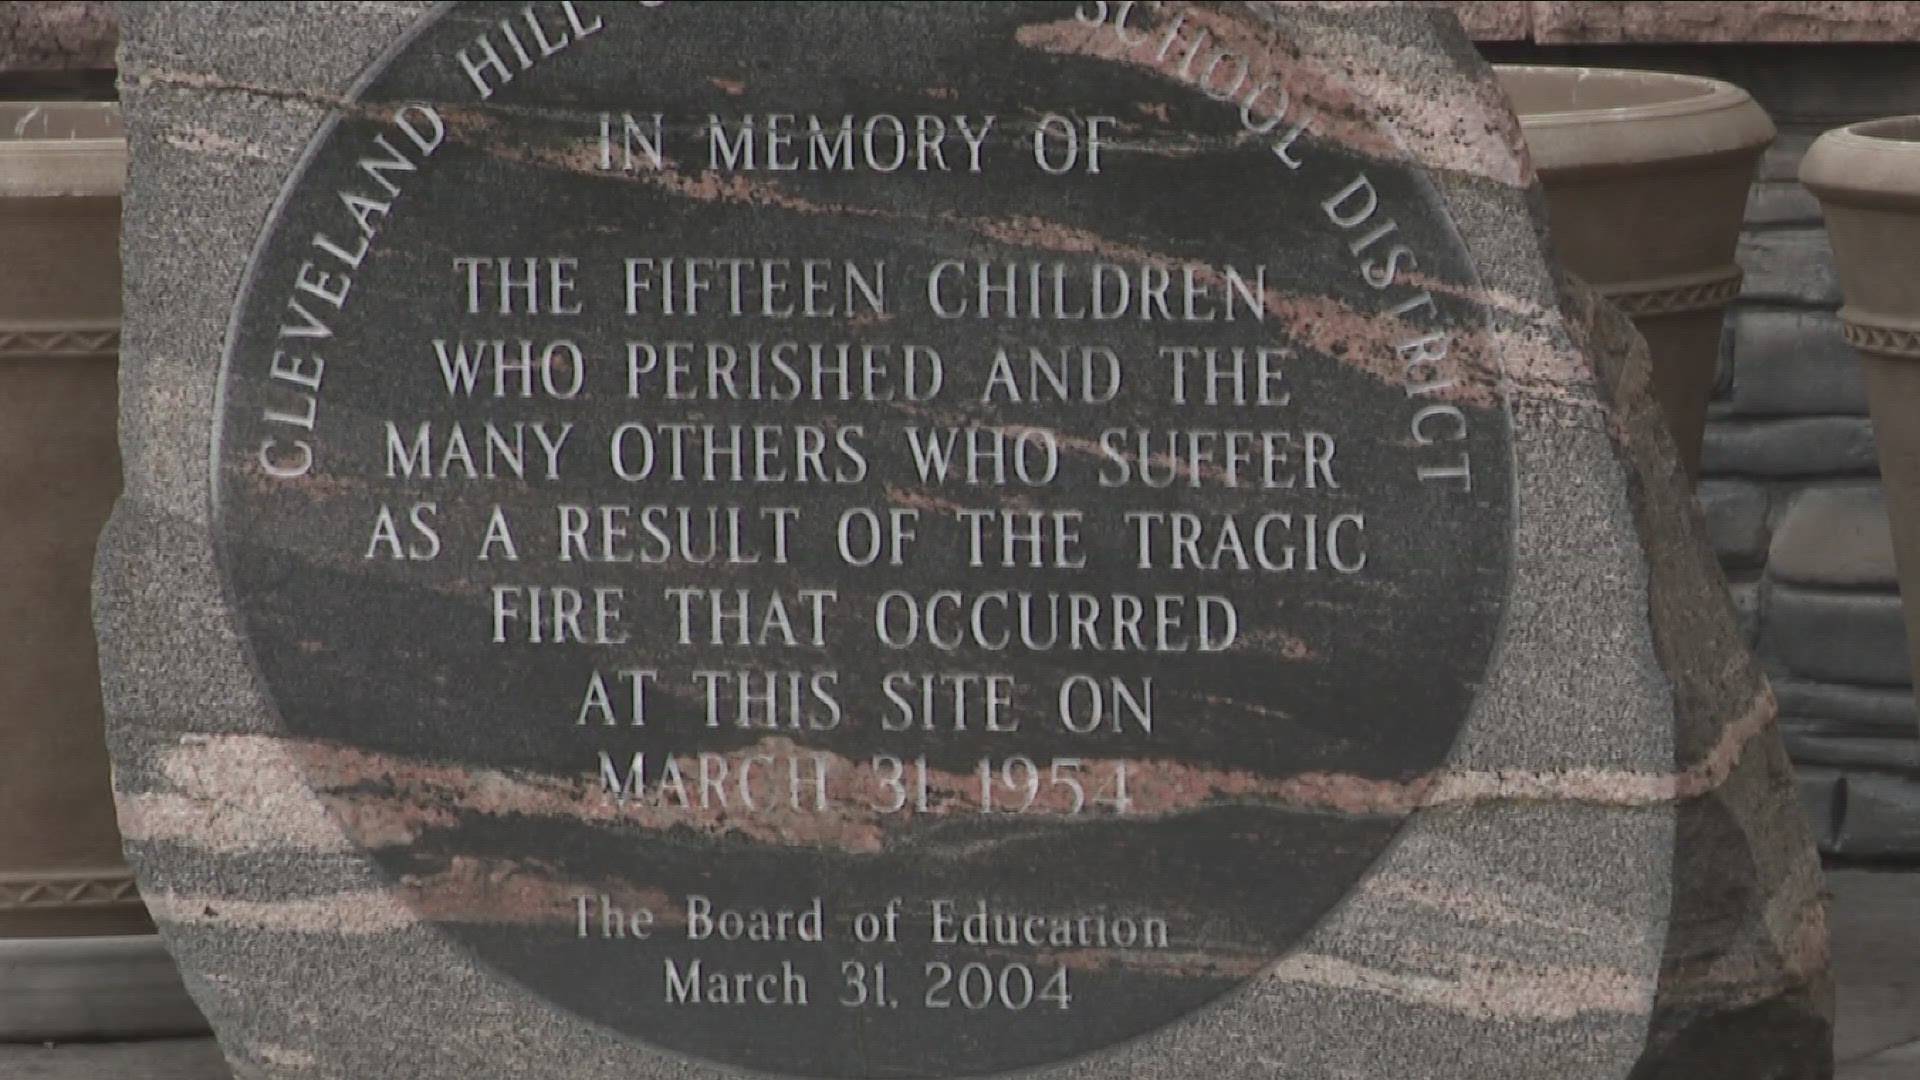 15 sixth graders were killed, 23 others were injured in the blaze 70 years ago this Sunday.